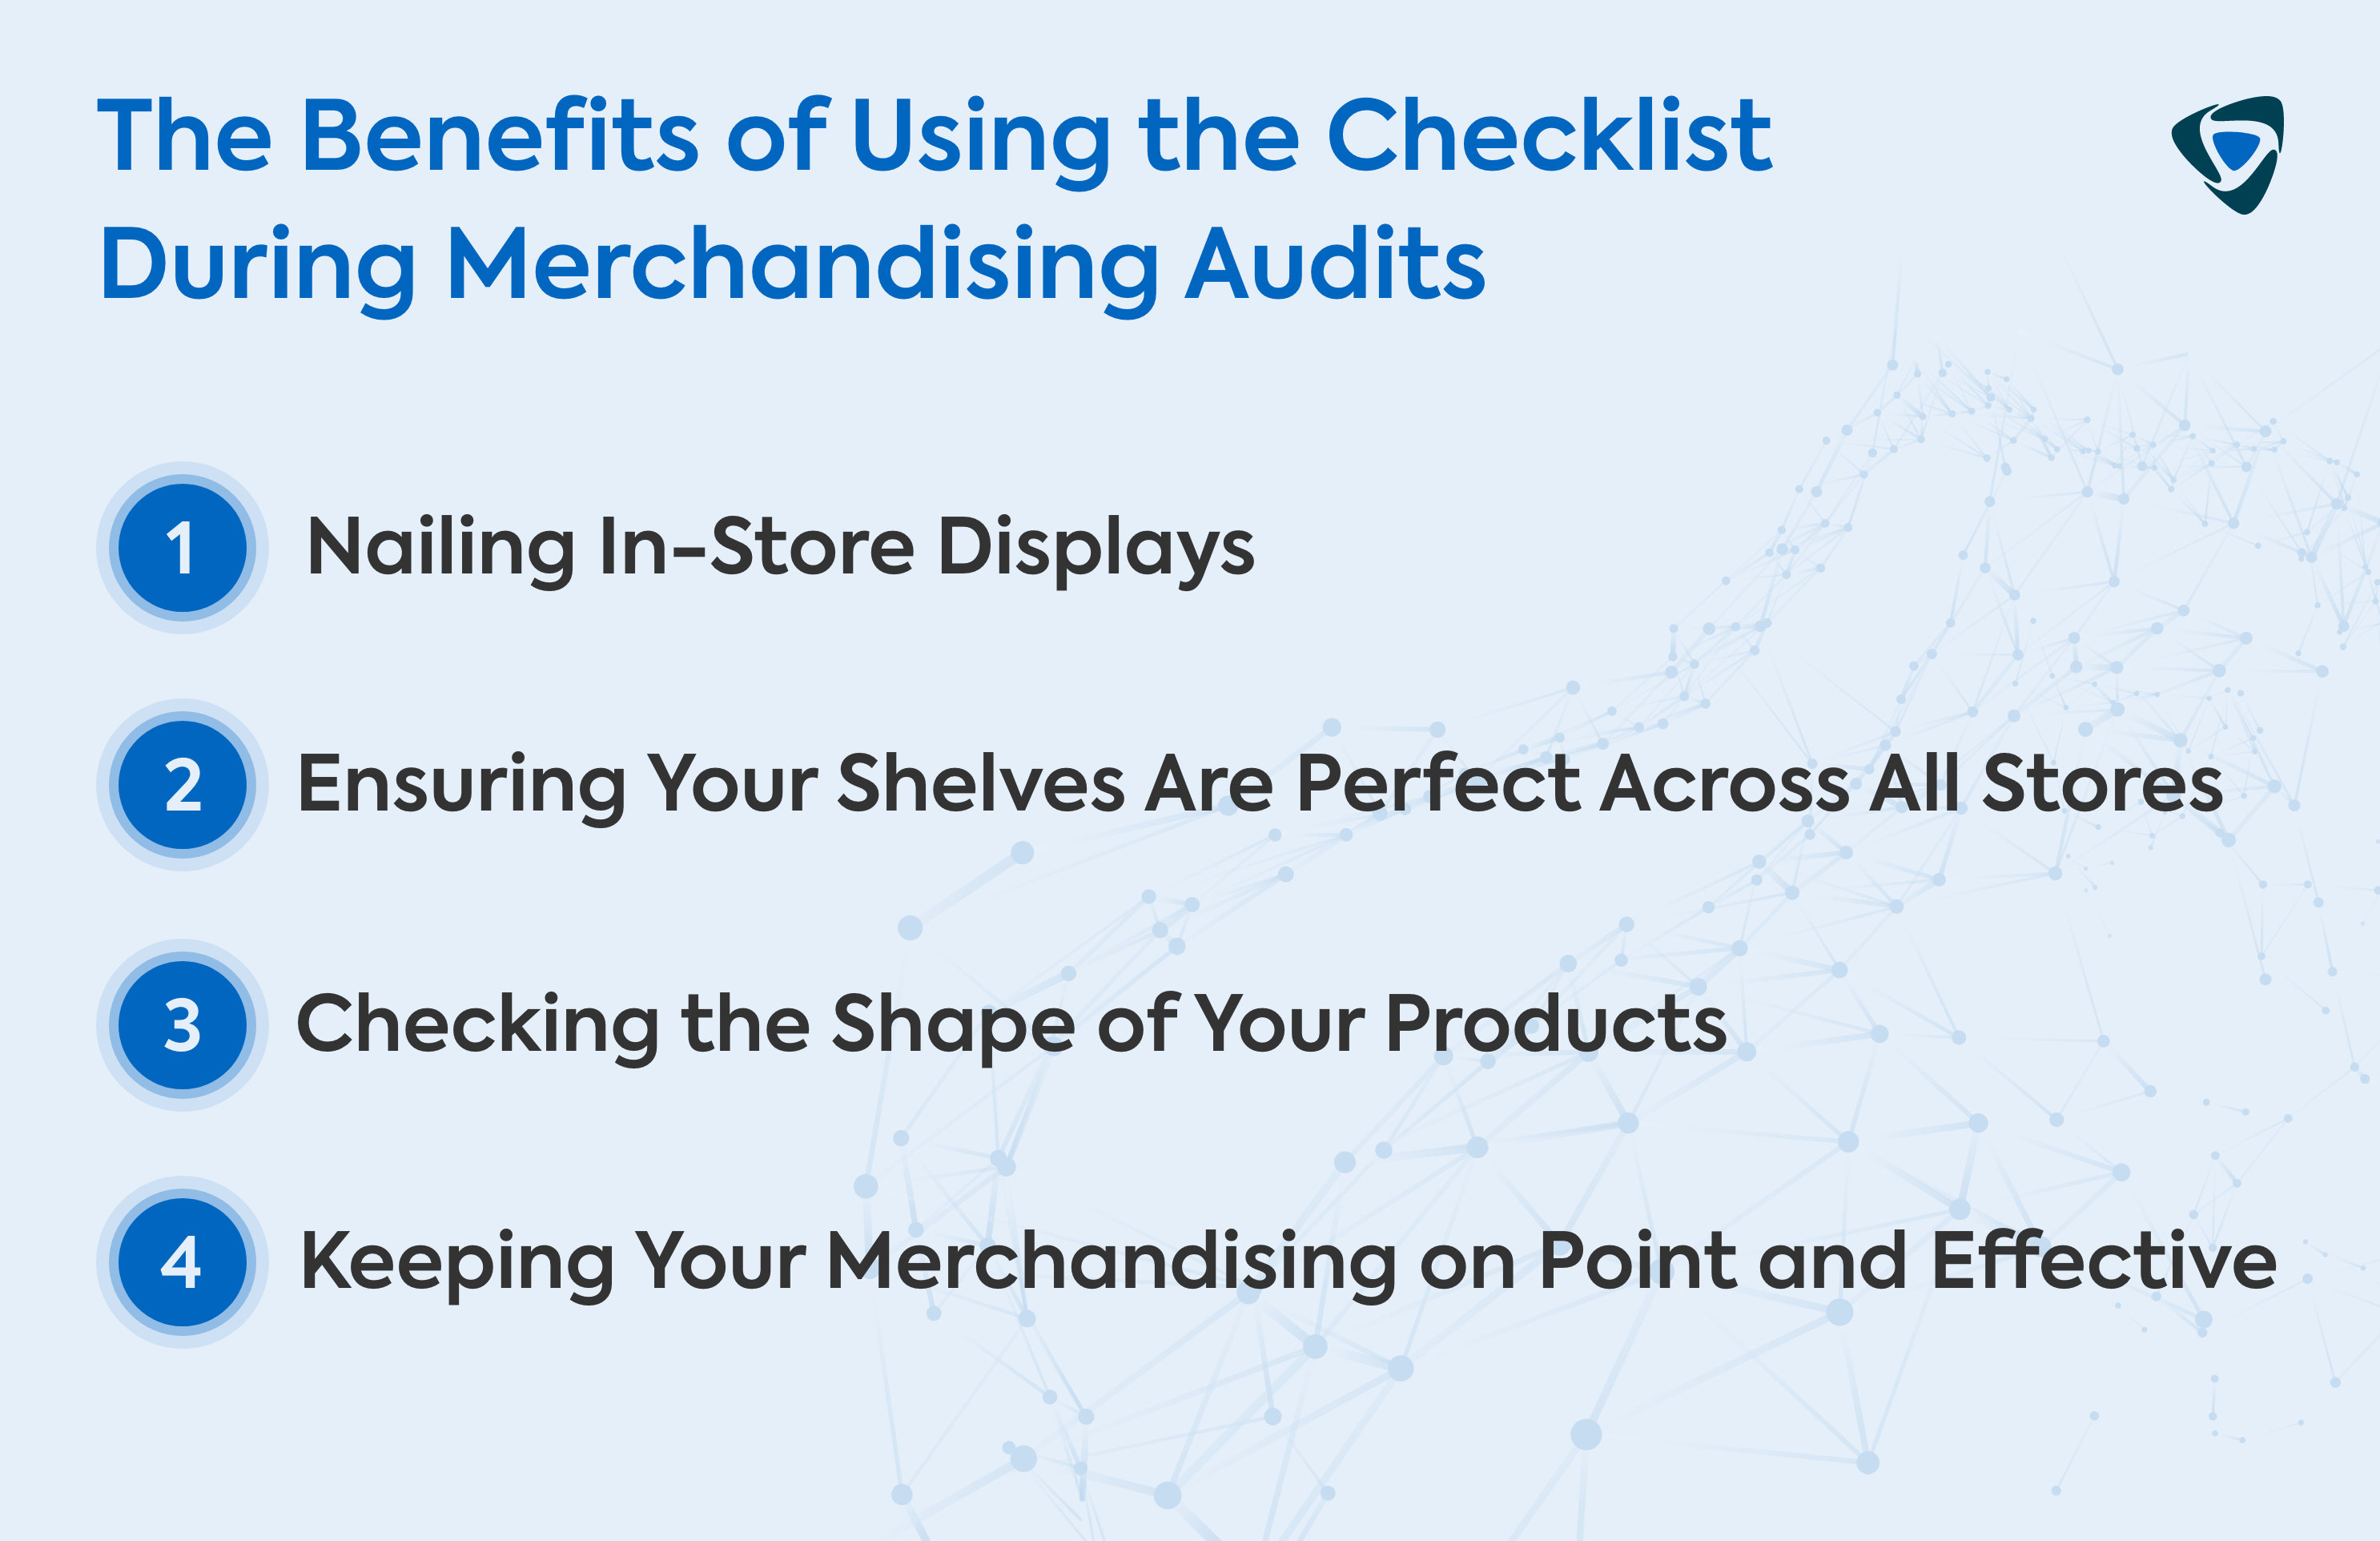 The Benefits of Using the Checklist During Merchandising Audits